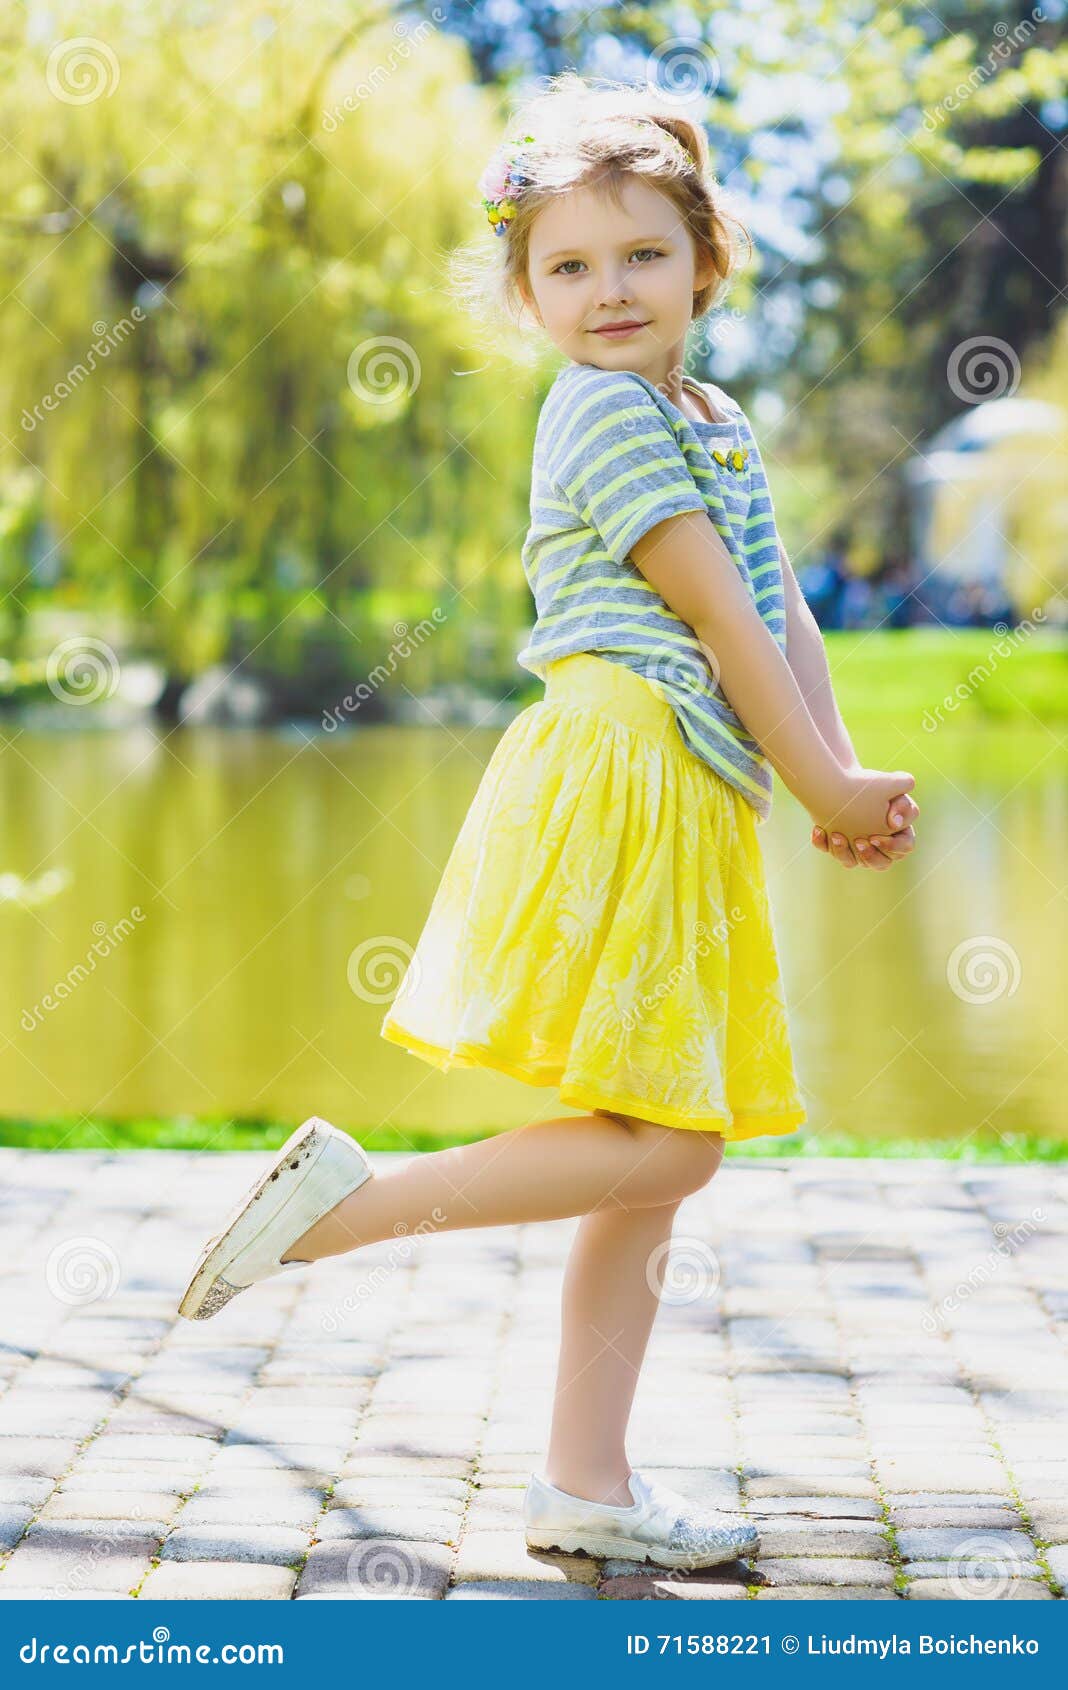 Girl Pose To Camera At Park Background With Her Dress Stock Photo -  Download Image Now - iStock